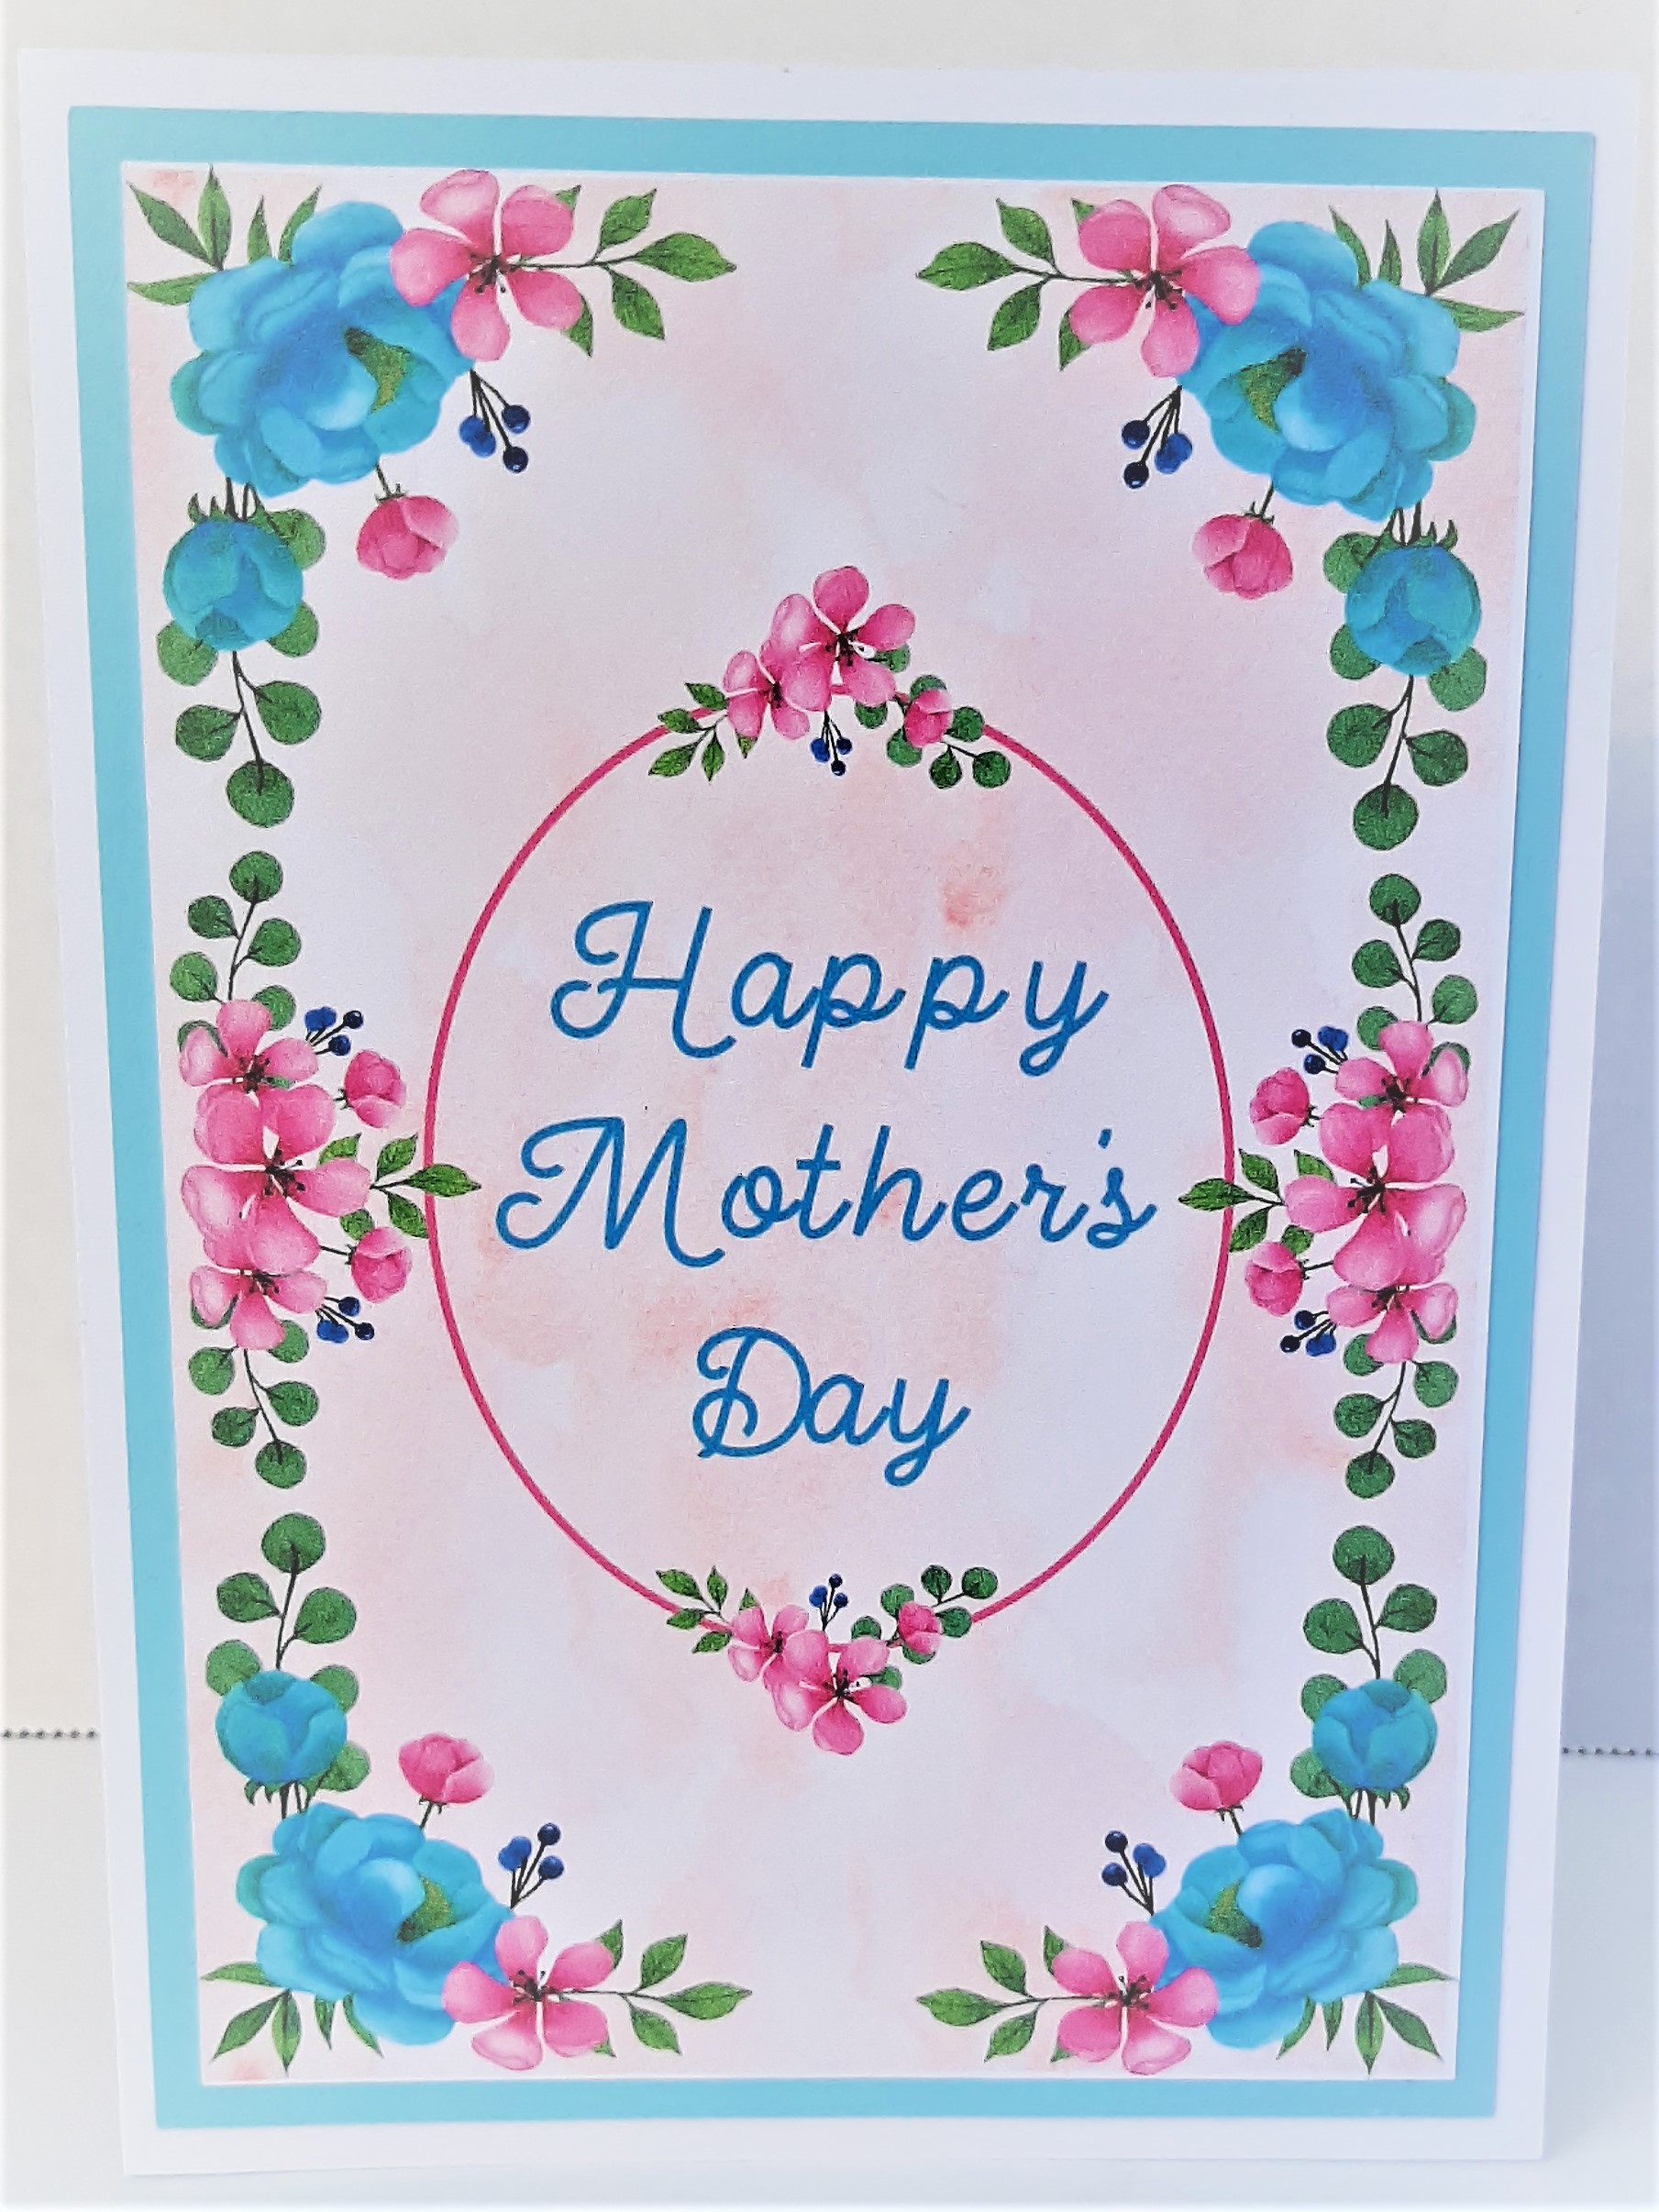 Mother's Day Watercolor Greeting Card